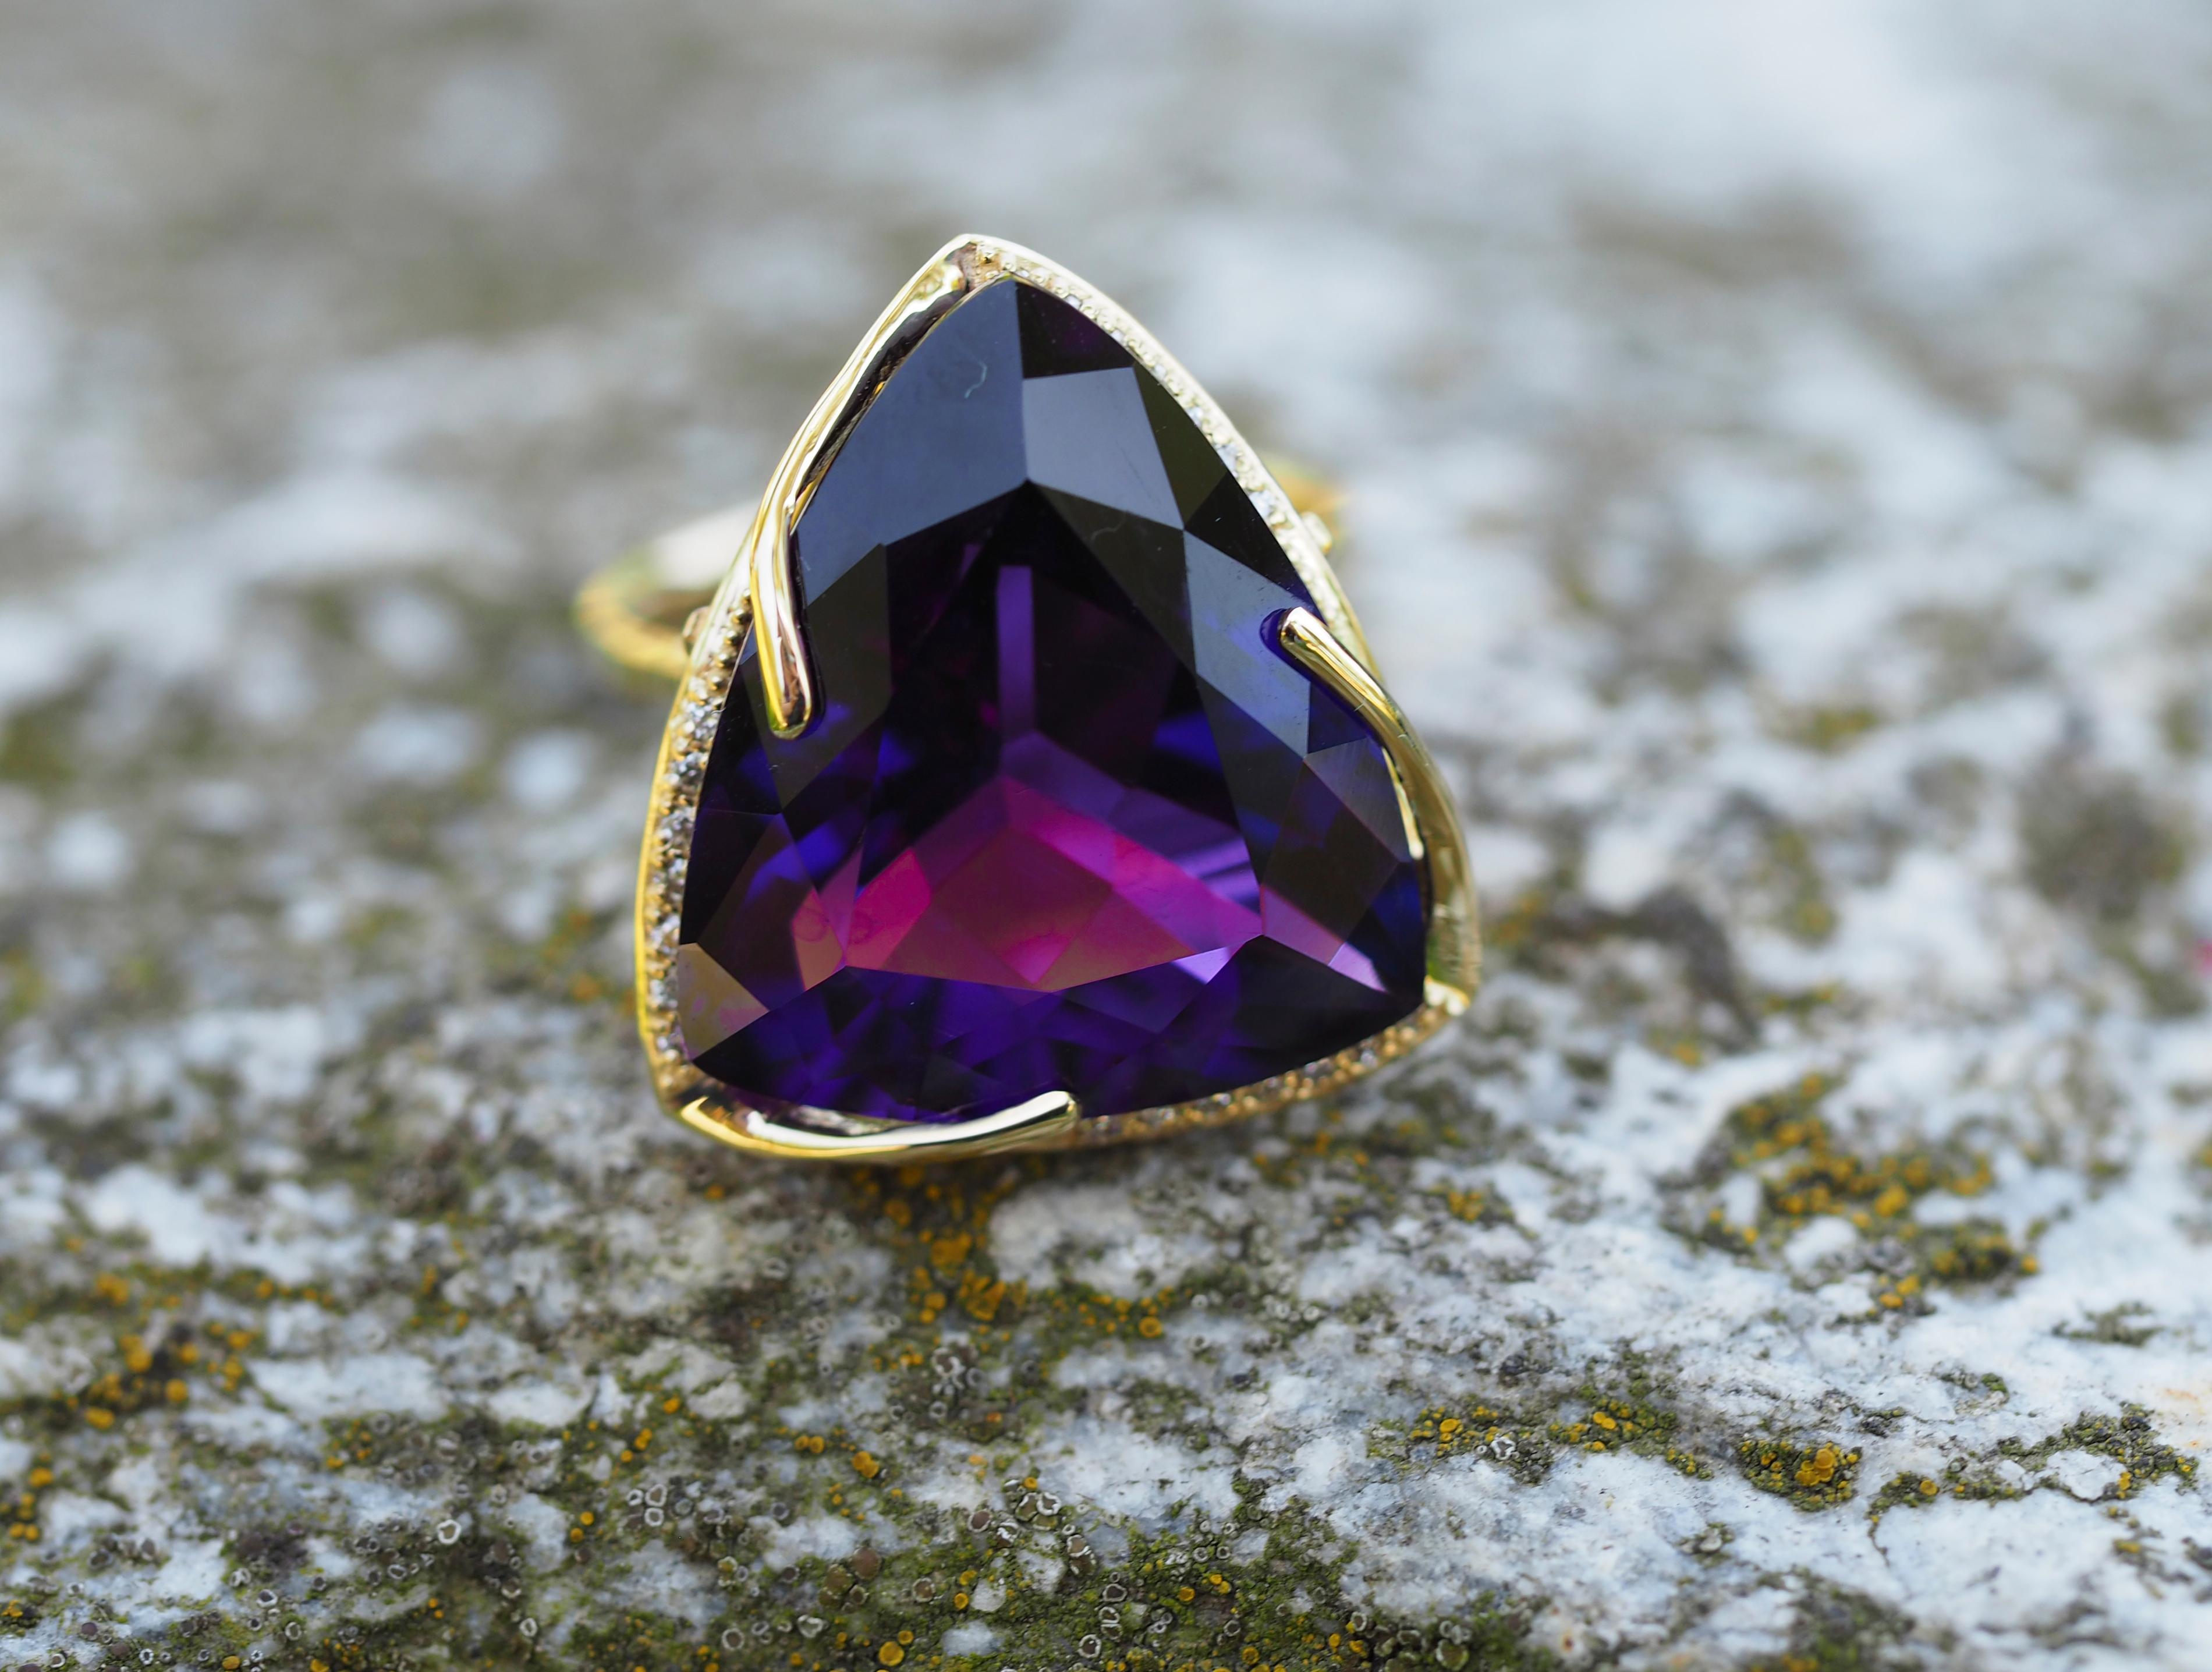 14 Karat Gold Ring with Amethyst and Diamonds, Amethyst Cocktail Ring 4